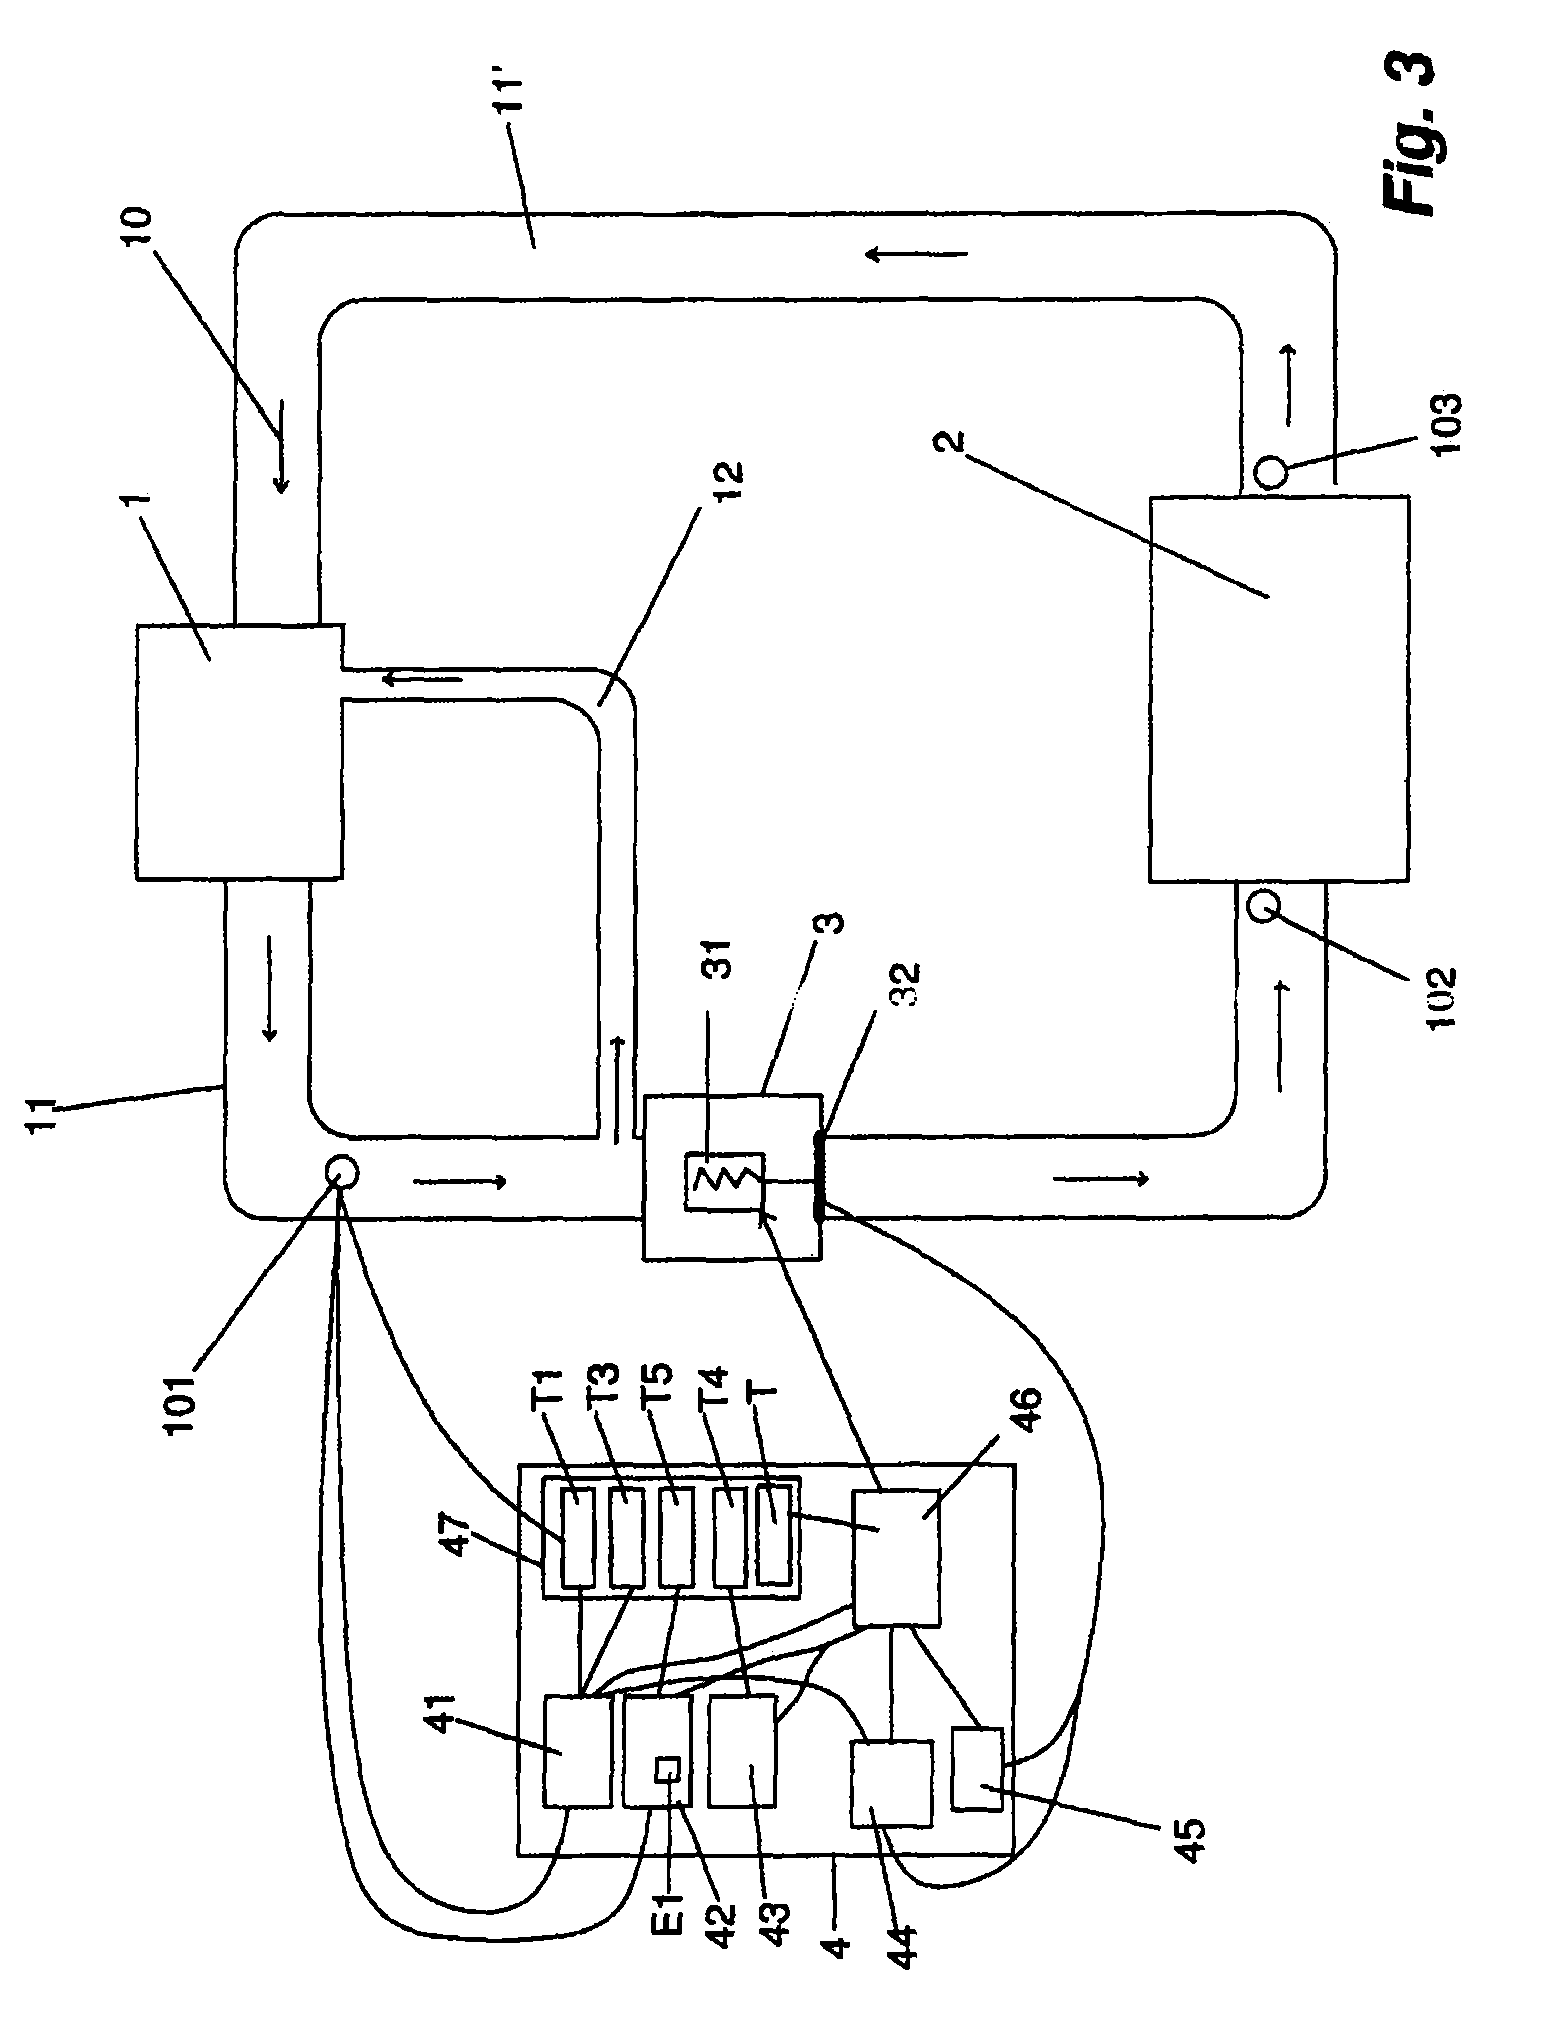 Method and device for controlling the initial opening of a thermostat regulating the temperature of an internal combustion engine